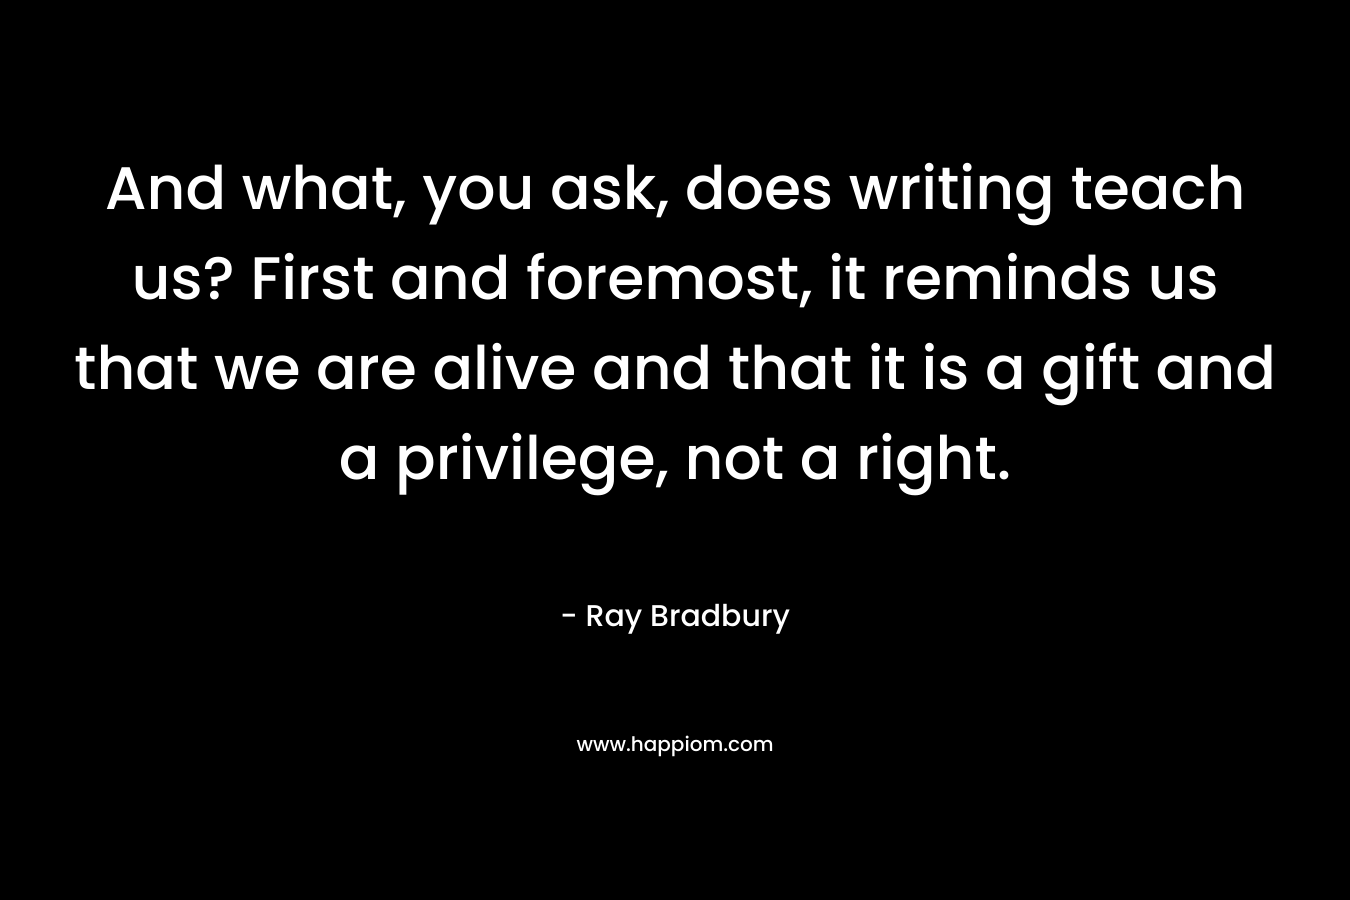 And what, you ask, does writing teach us? First and foremost, it reminds us that we are alive and that it is a gift and a privilege, not a right. – Ray Bradbury